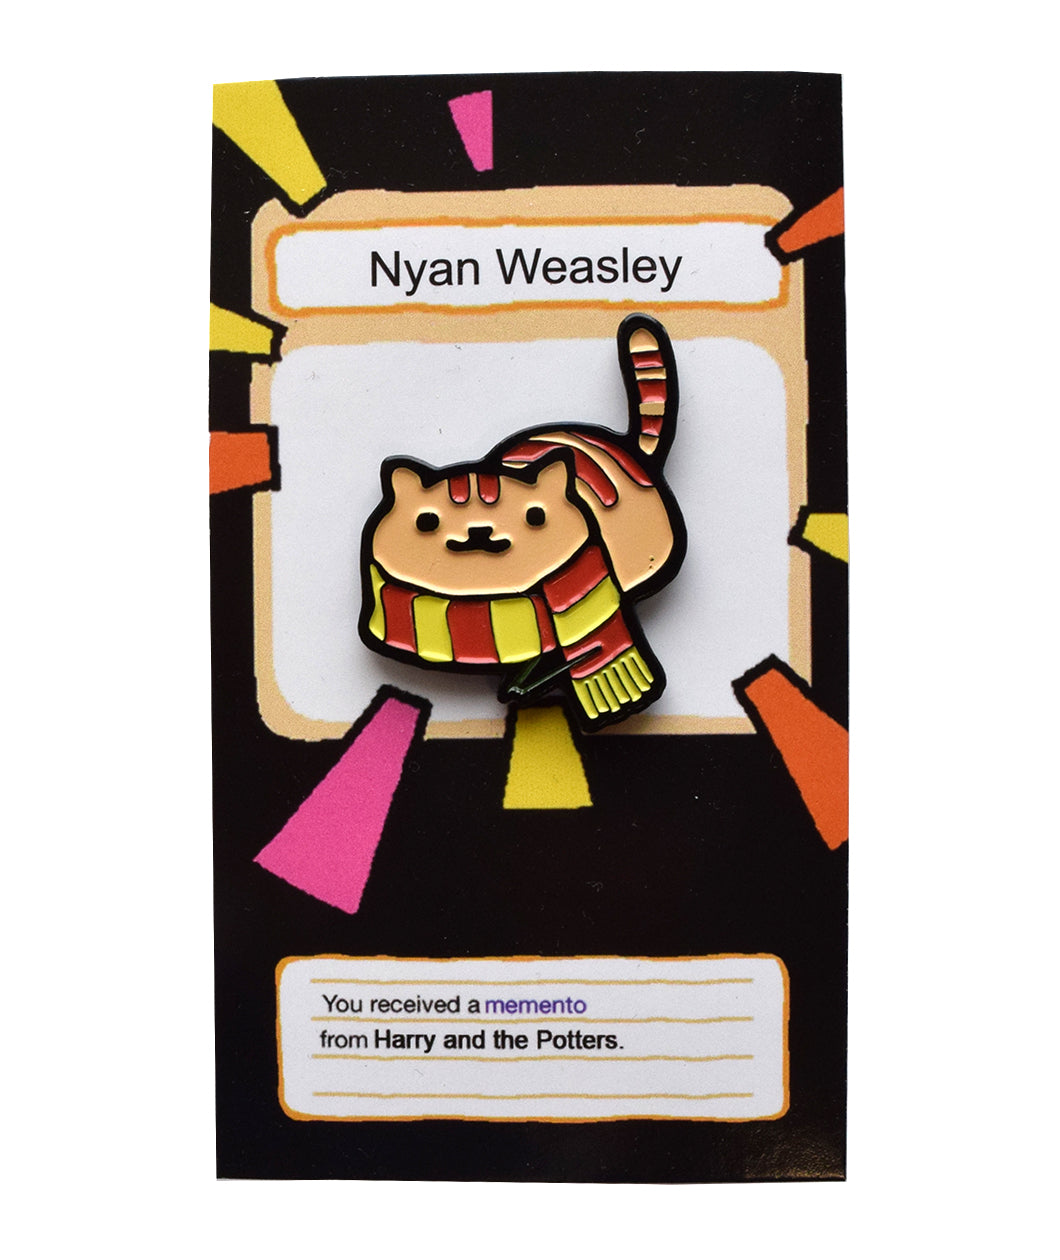 A pin shaped like cat that is orange with red stripes. It has a knitted scarf around its neck. The pink backing reads 